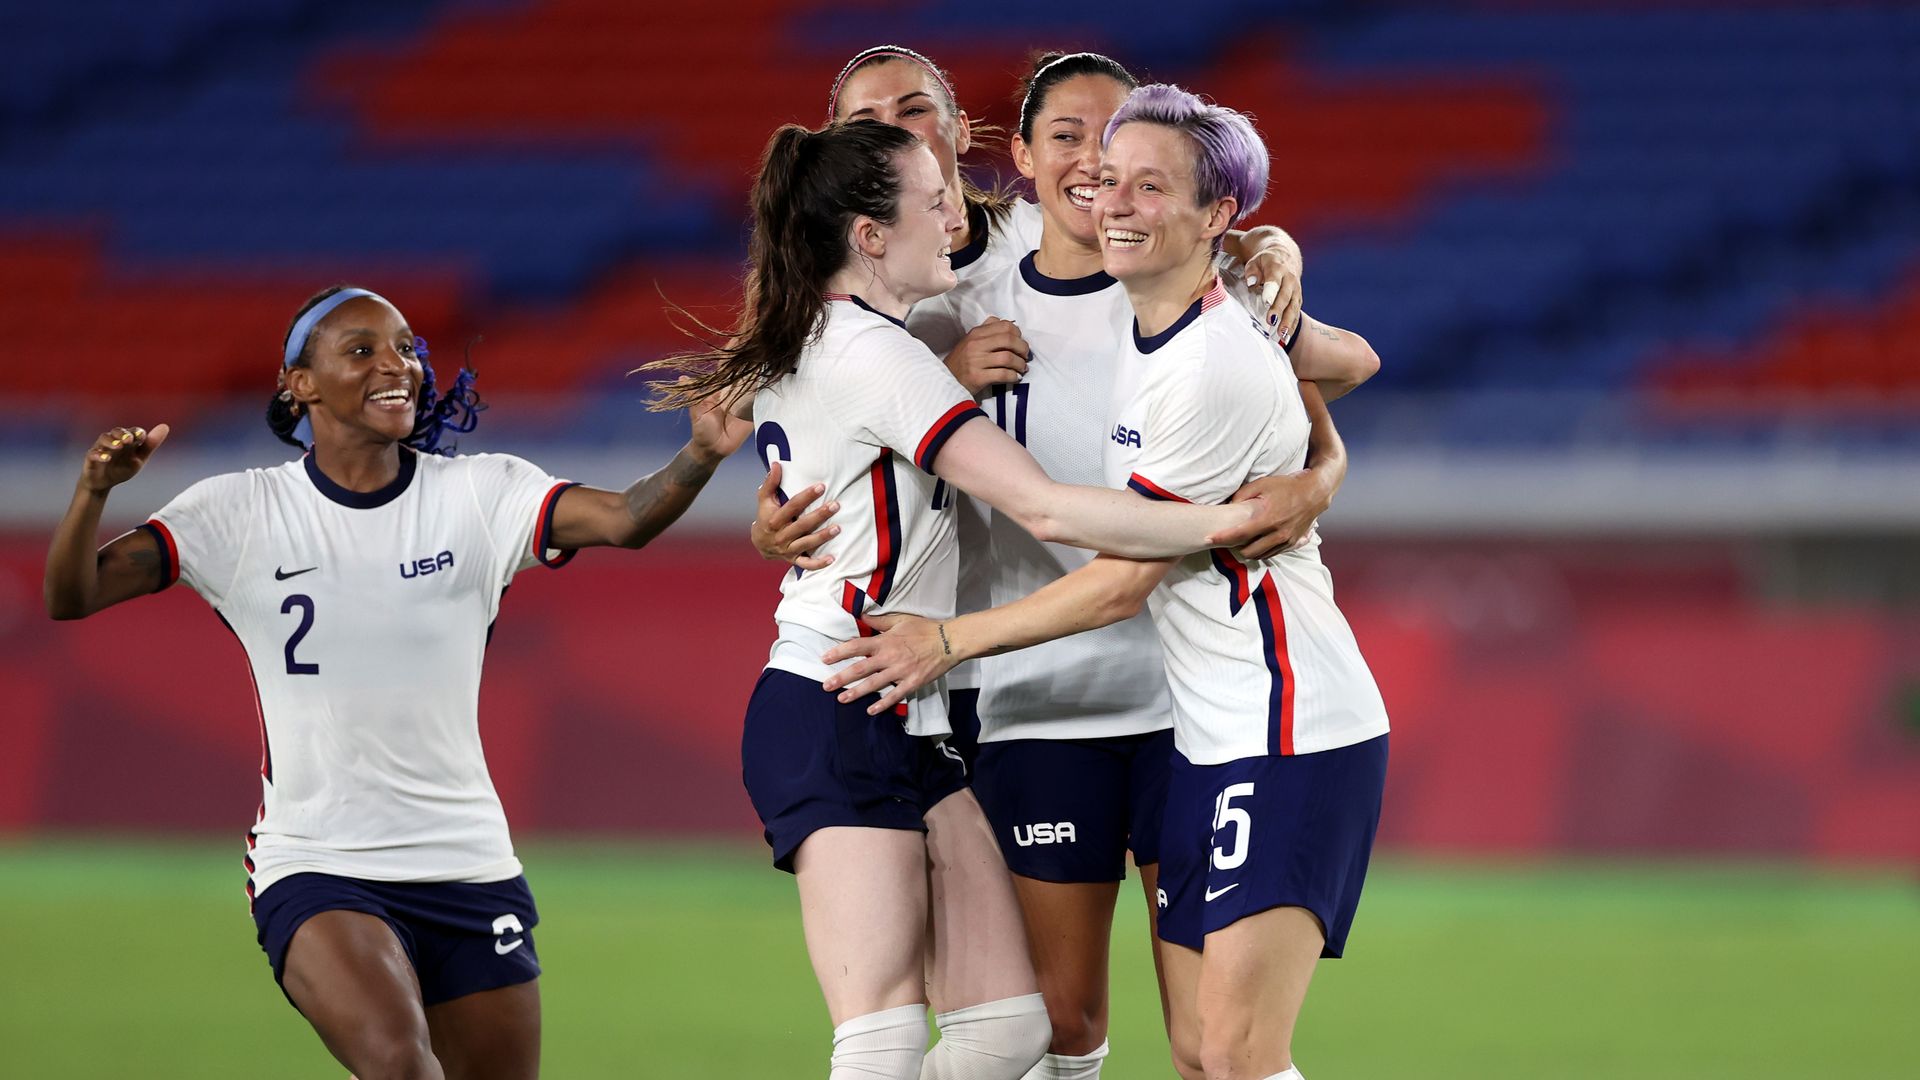 Image of the U.S. women's soccer team celebrating their victory after a penalty kick shootout.